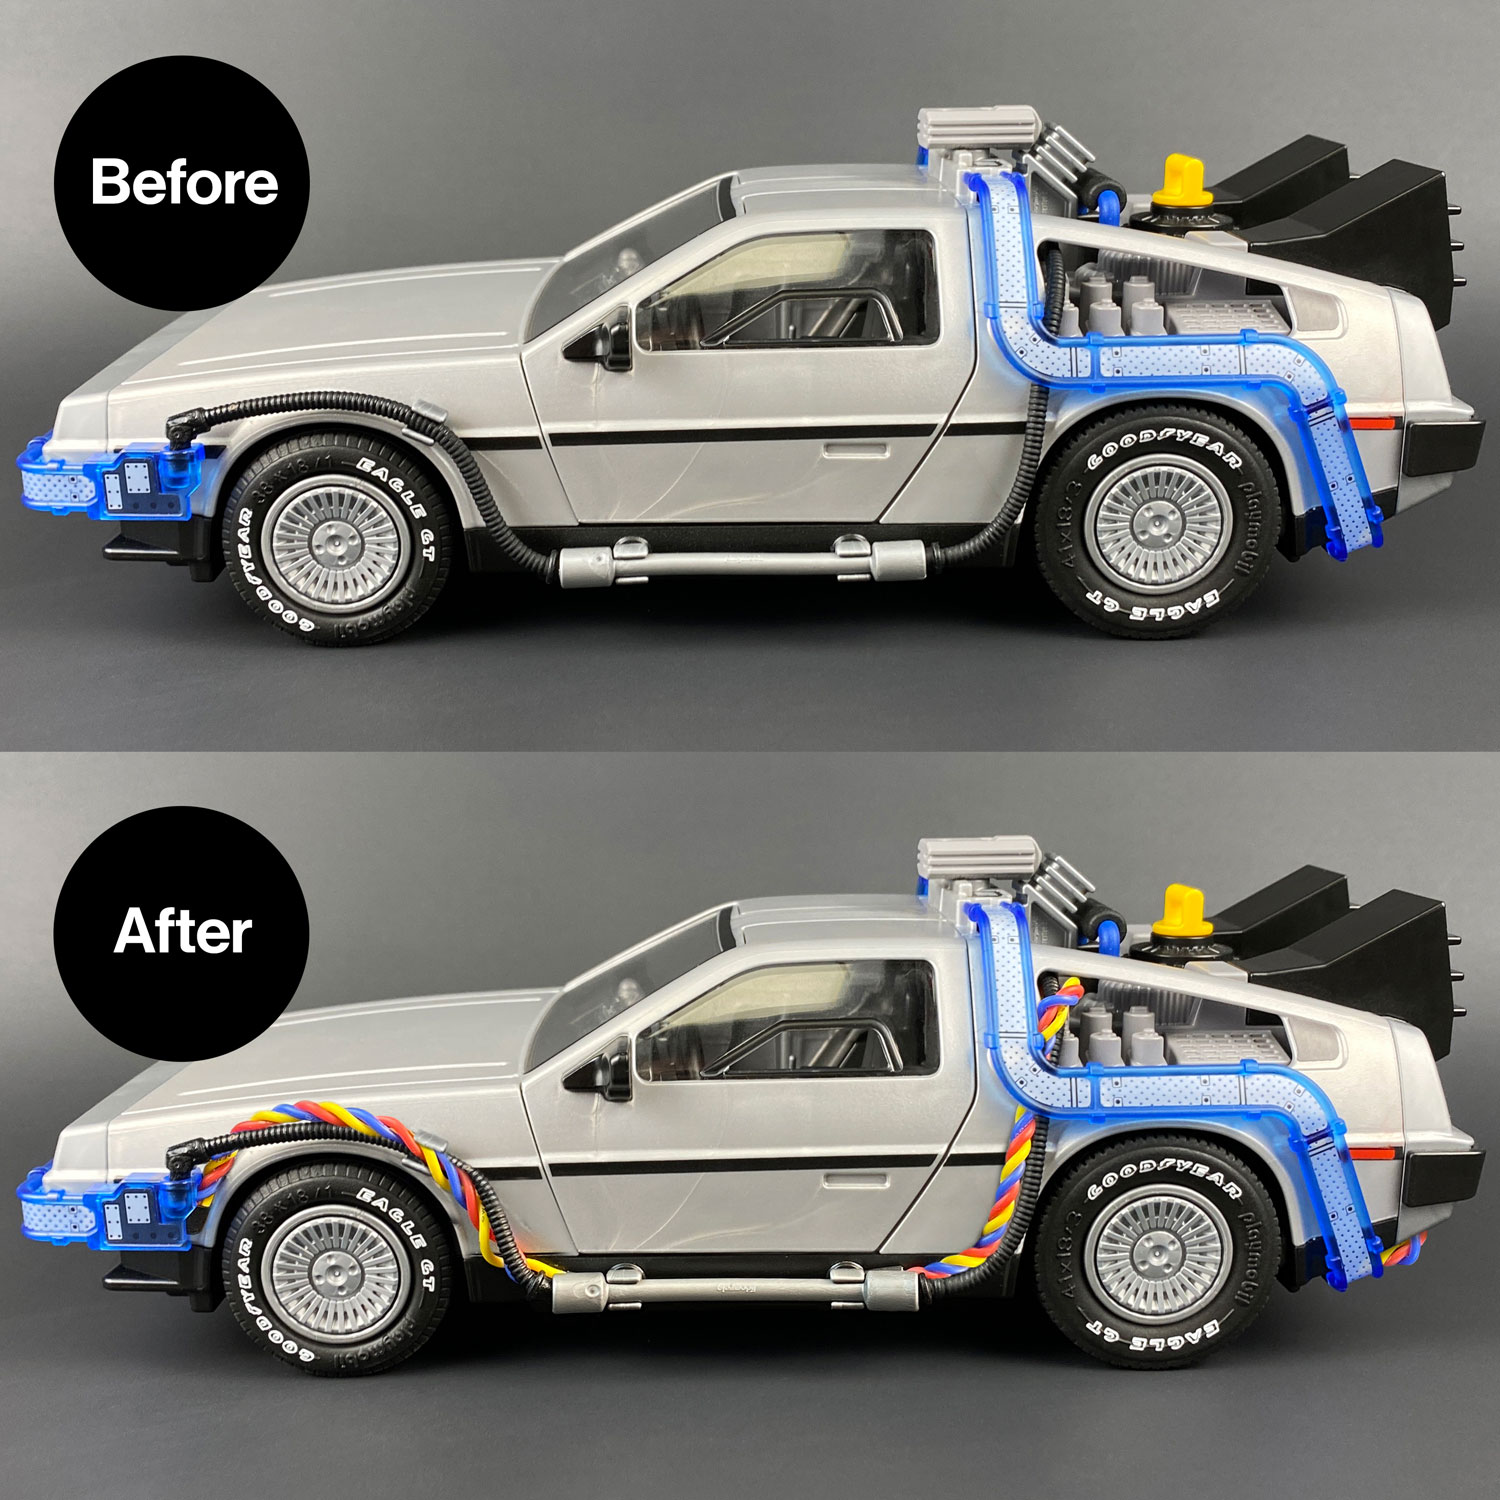 Before and after Playmobil DeLorean Flux Wires mod installed